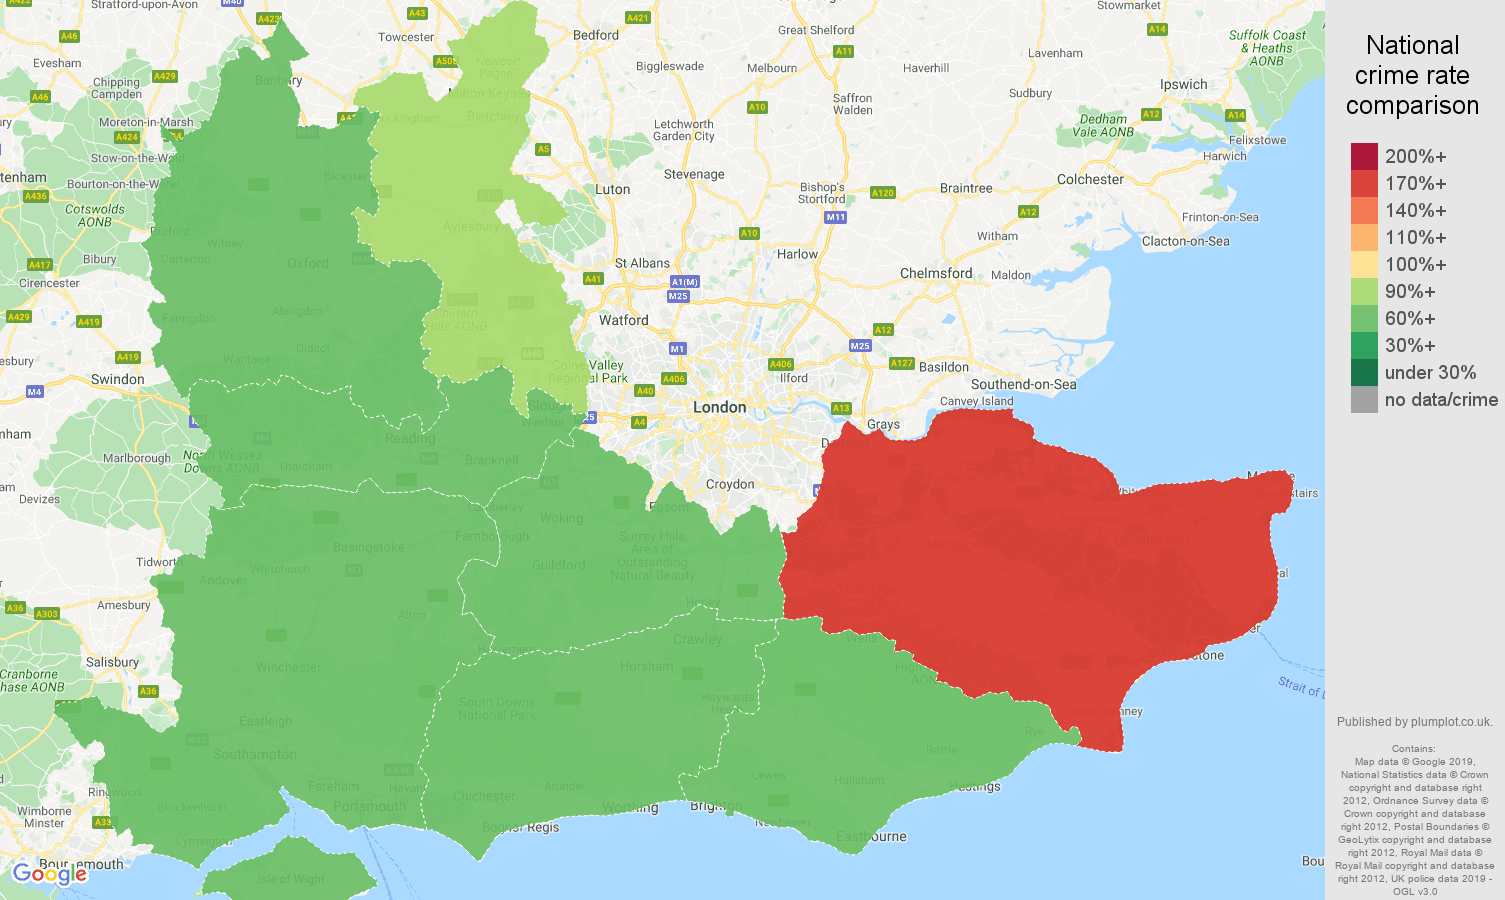 South East other crime rate comparison map